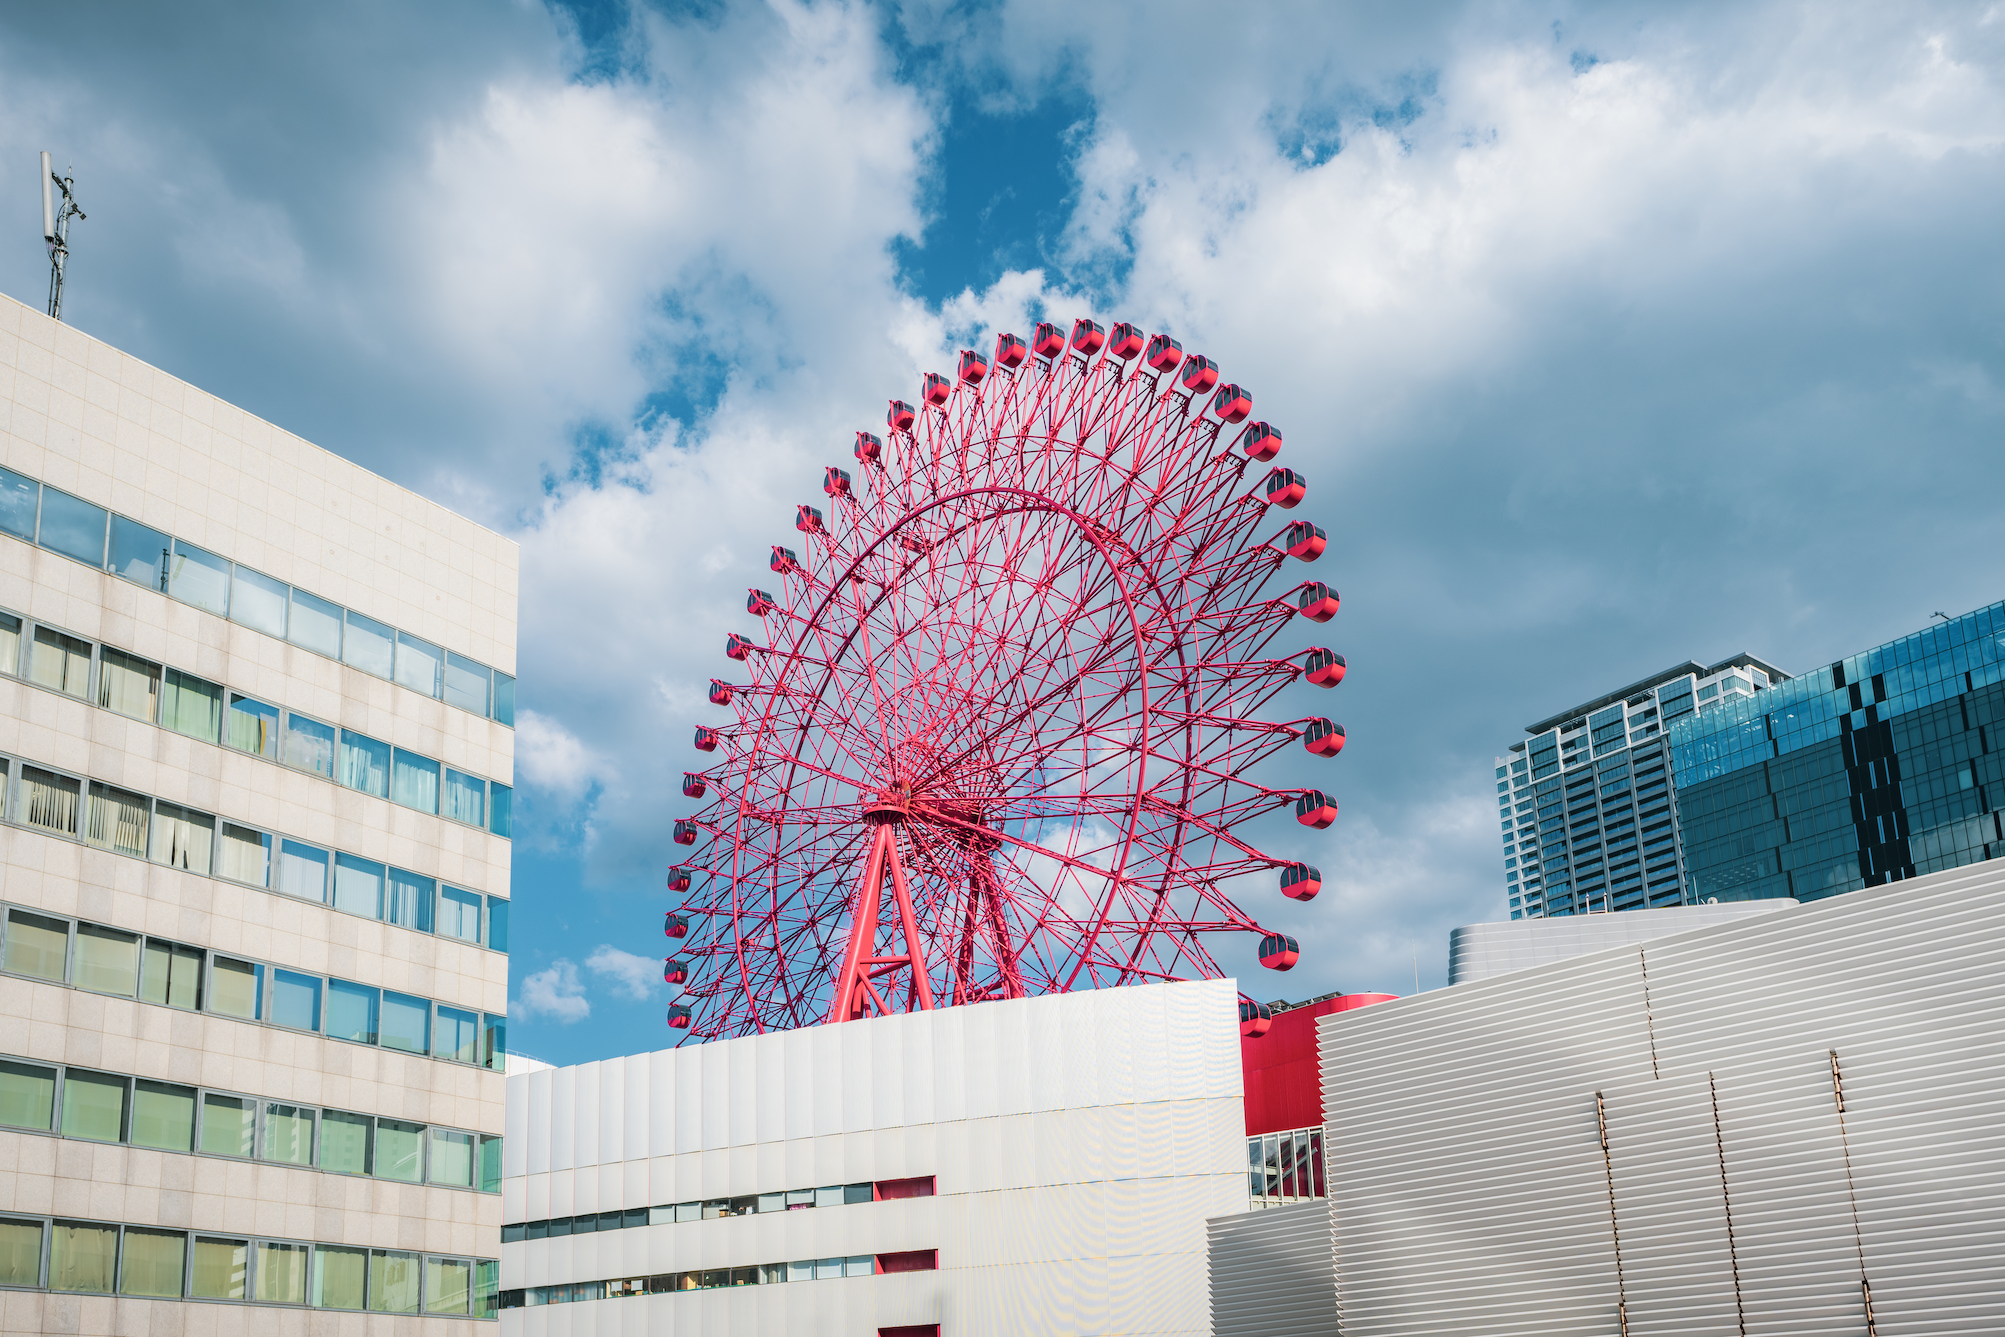 Red Hep Five ferris wheel surrounded by buildings around it against a cloudy blue sky